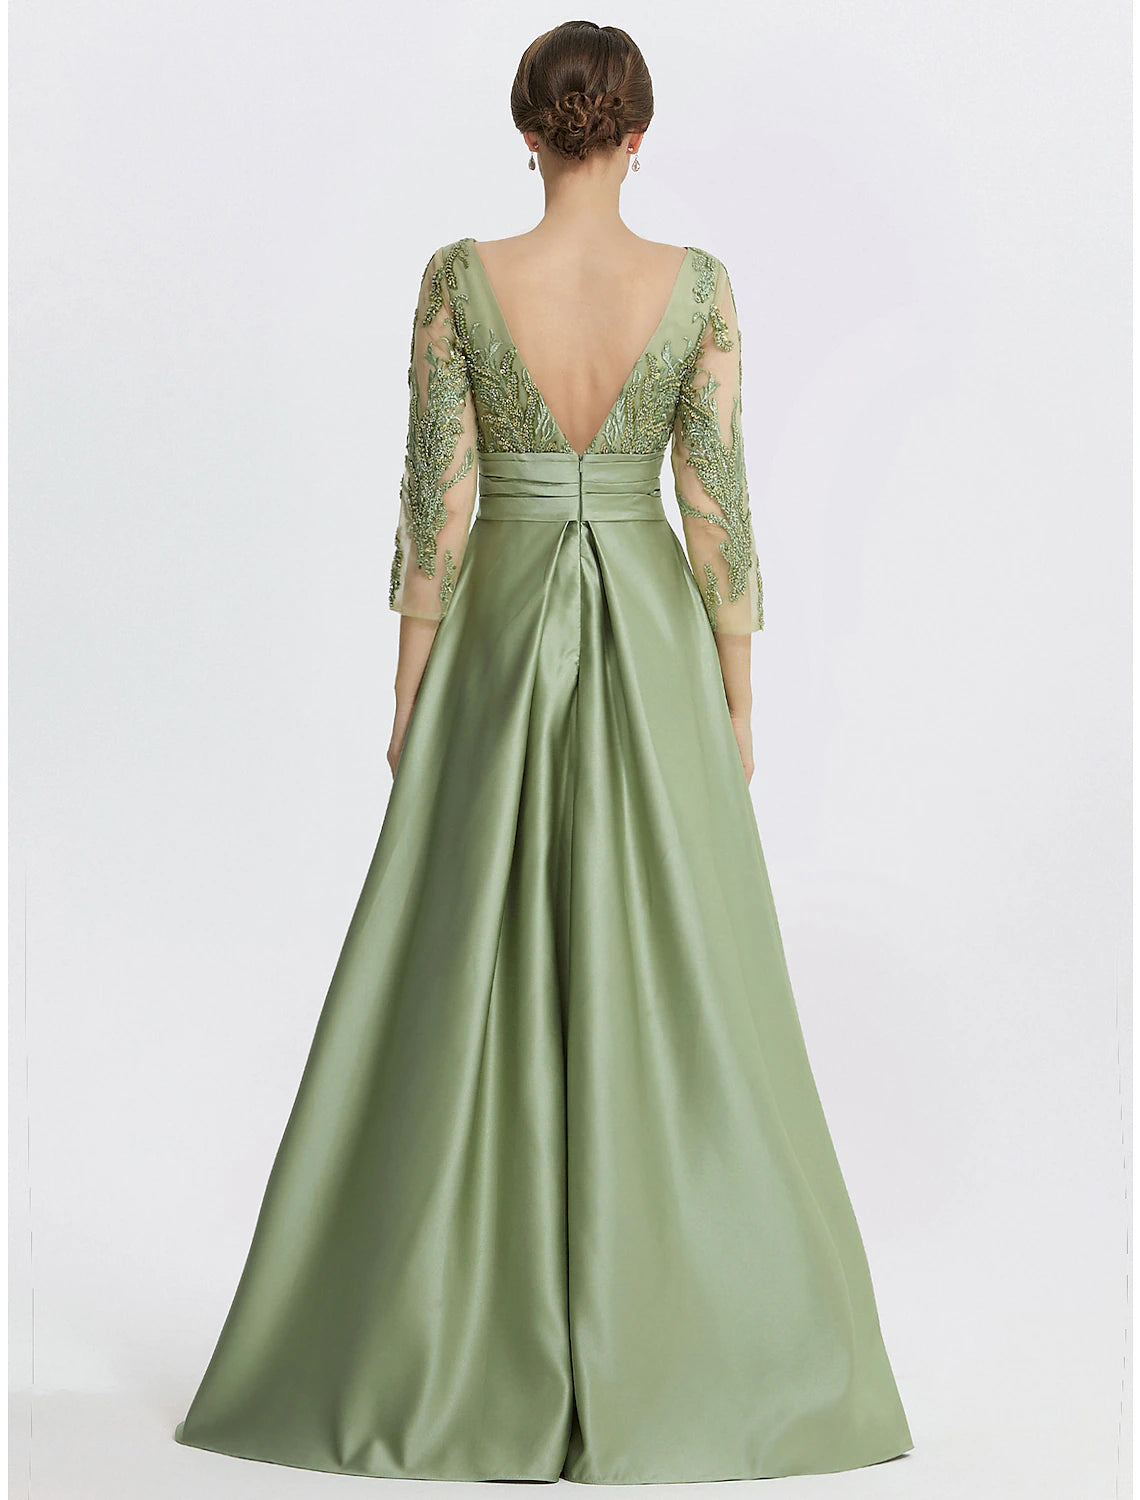 A-Line Evening Gown Elegant Dress Formal Floor Length 3/4 Length Sleeve Jewel Neck Satin with Slit Embroidery Appliques